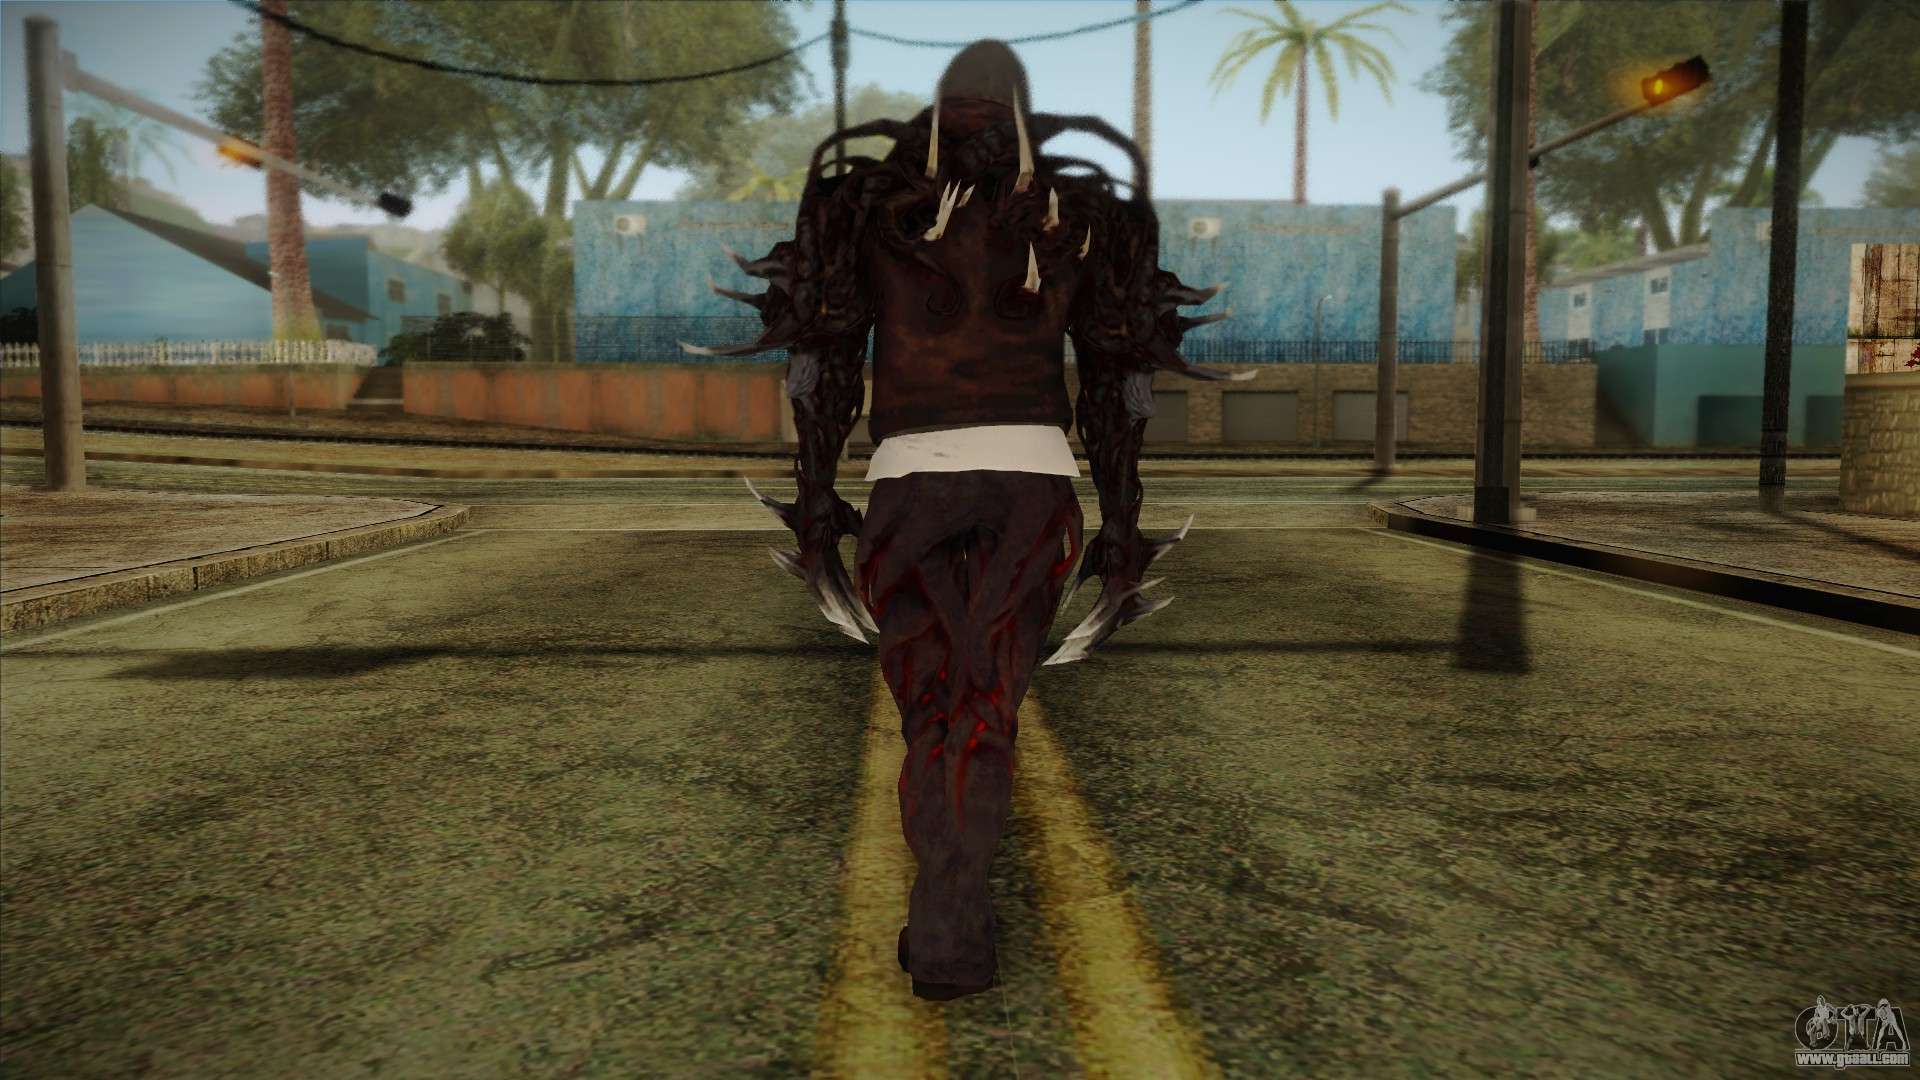 Boss from Prototype 2 for San Andreas